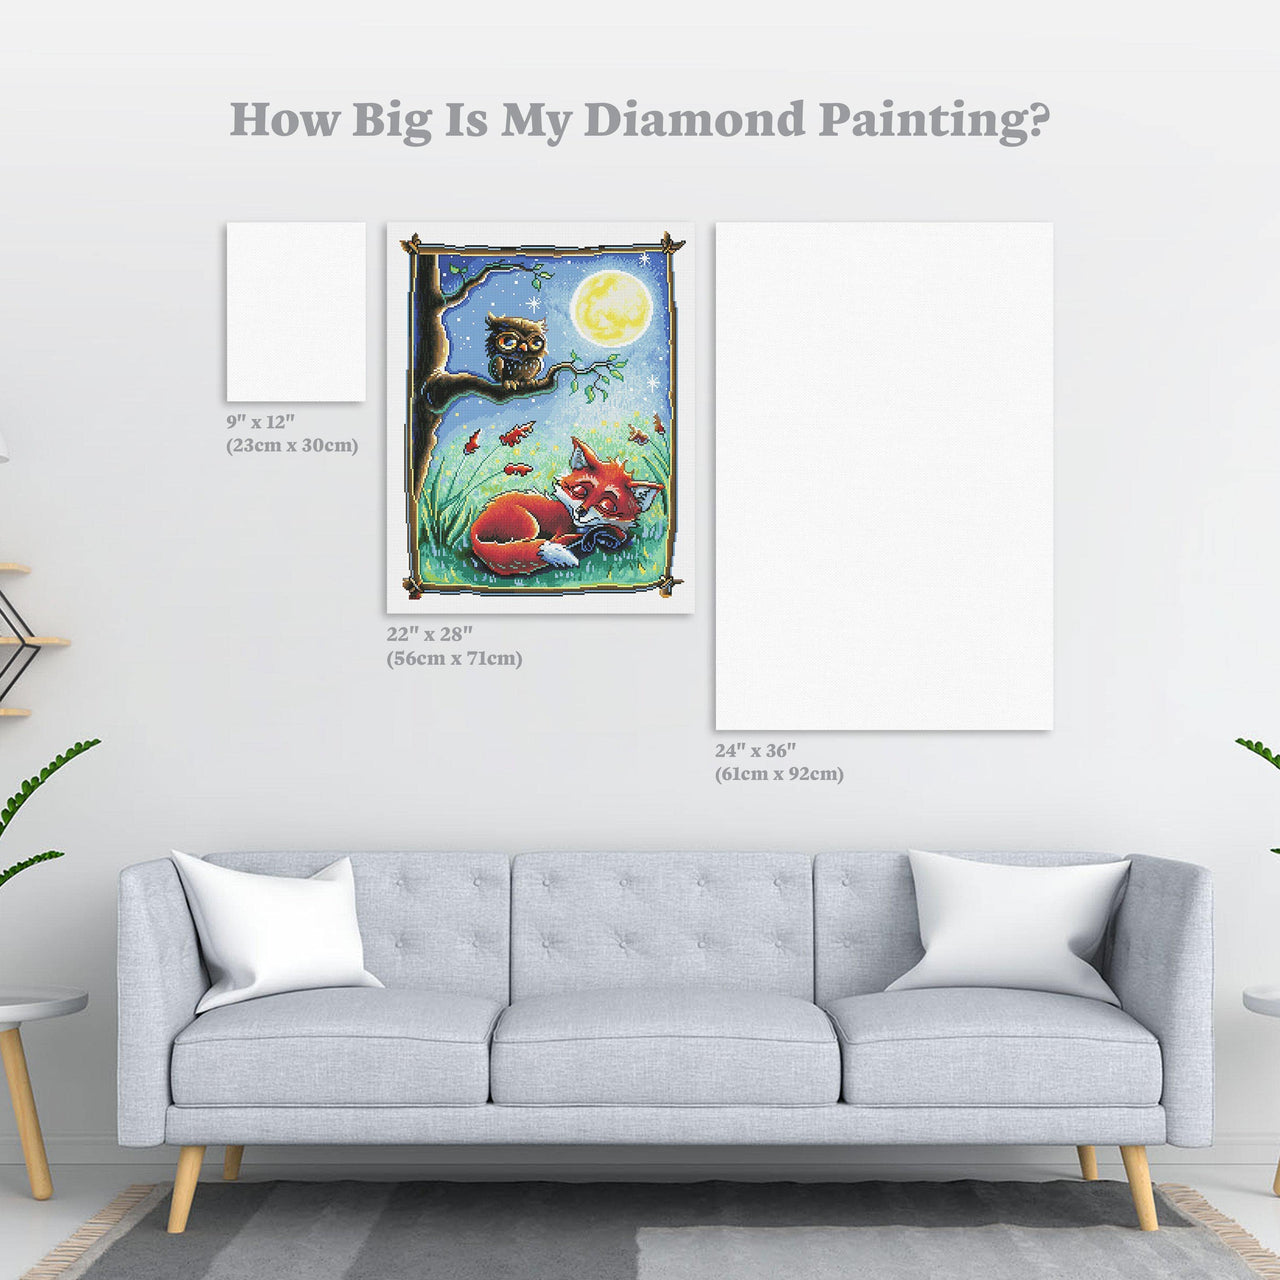 Diamond Painting Sleeping Fox 22" x 28″ (56cm x 71cm) / Round with 47 Colors including 2 ABs / 49,896